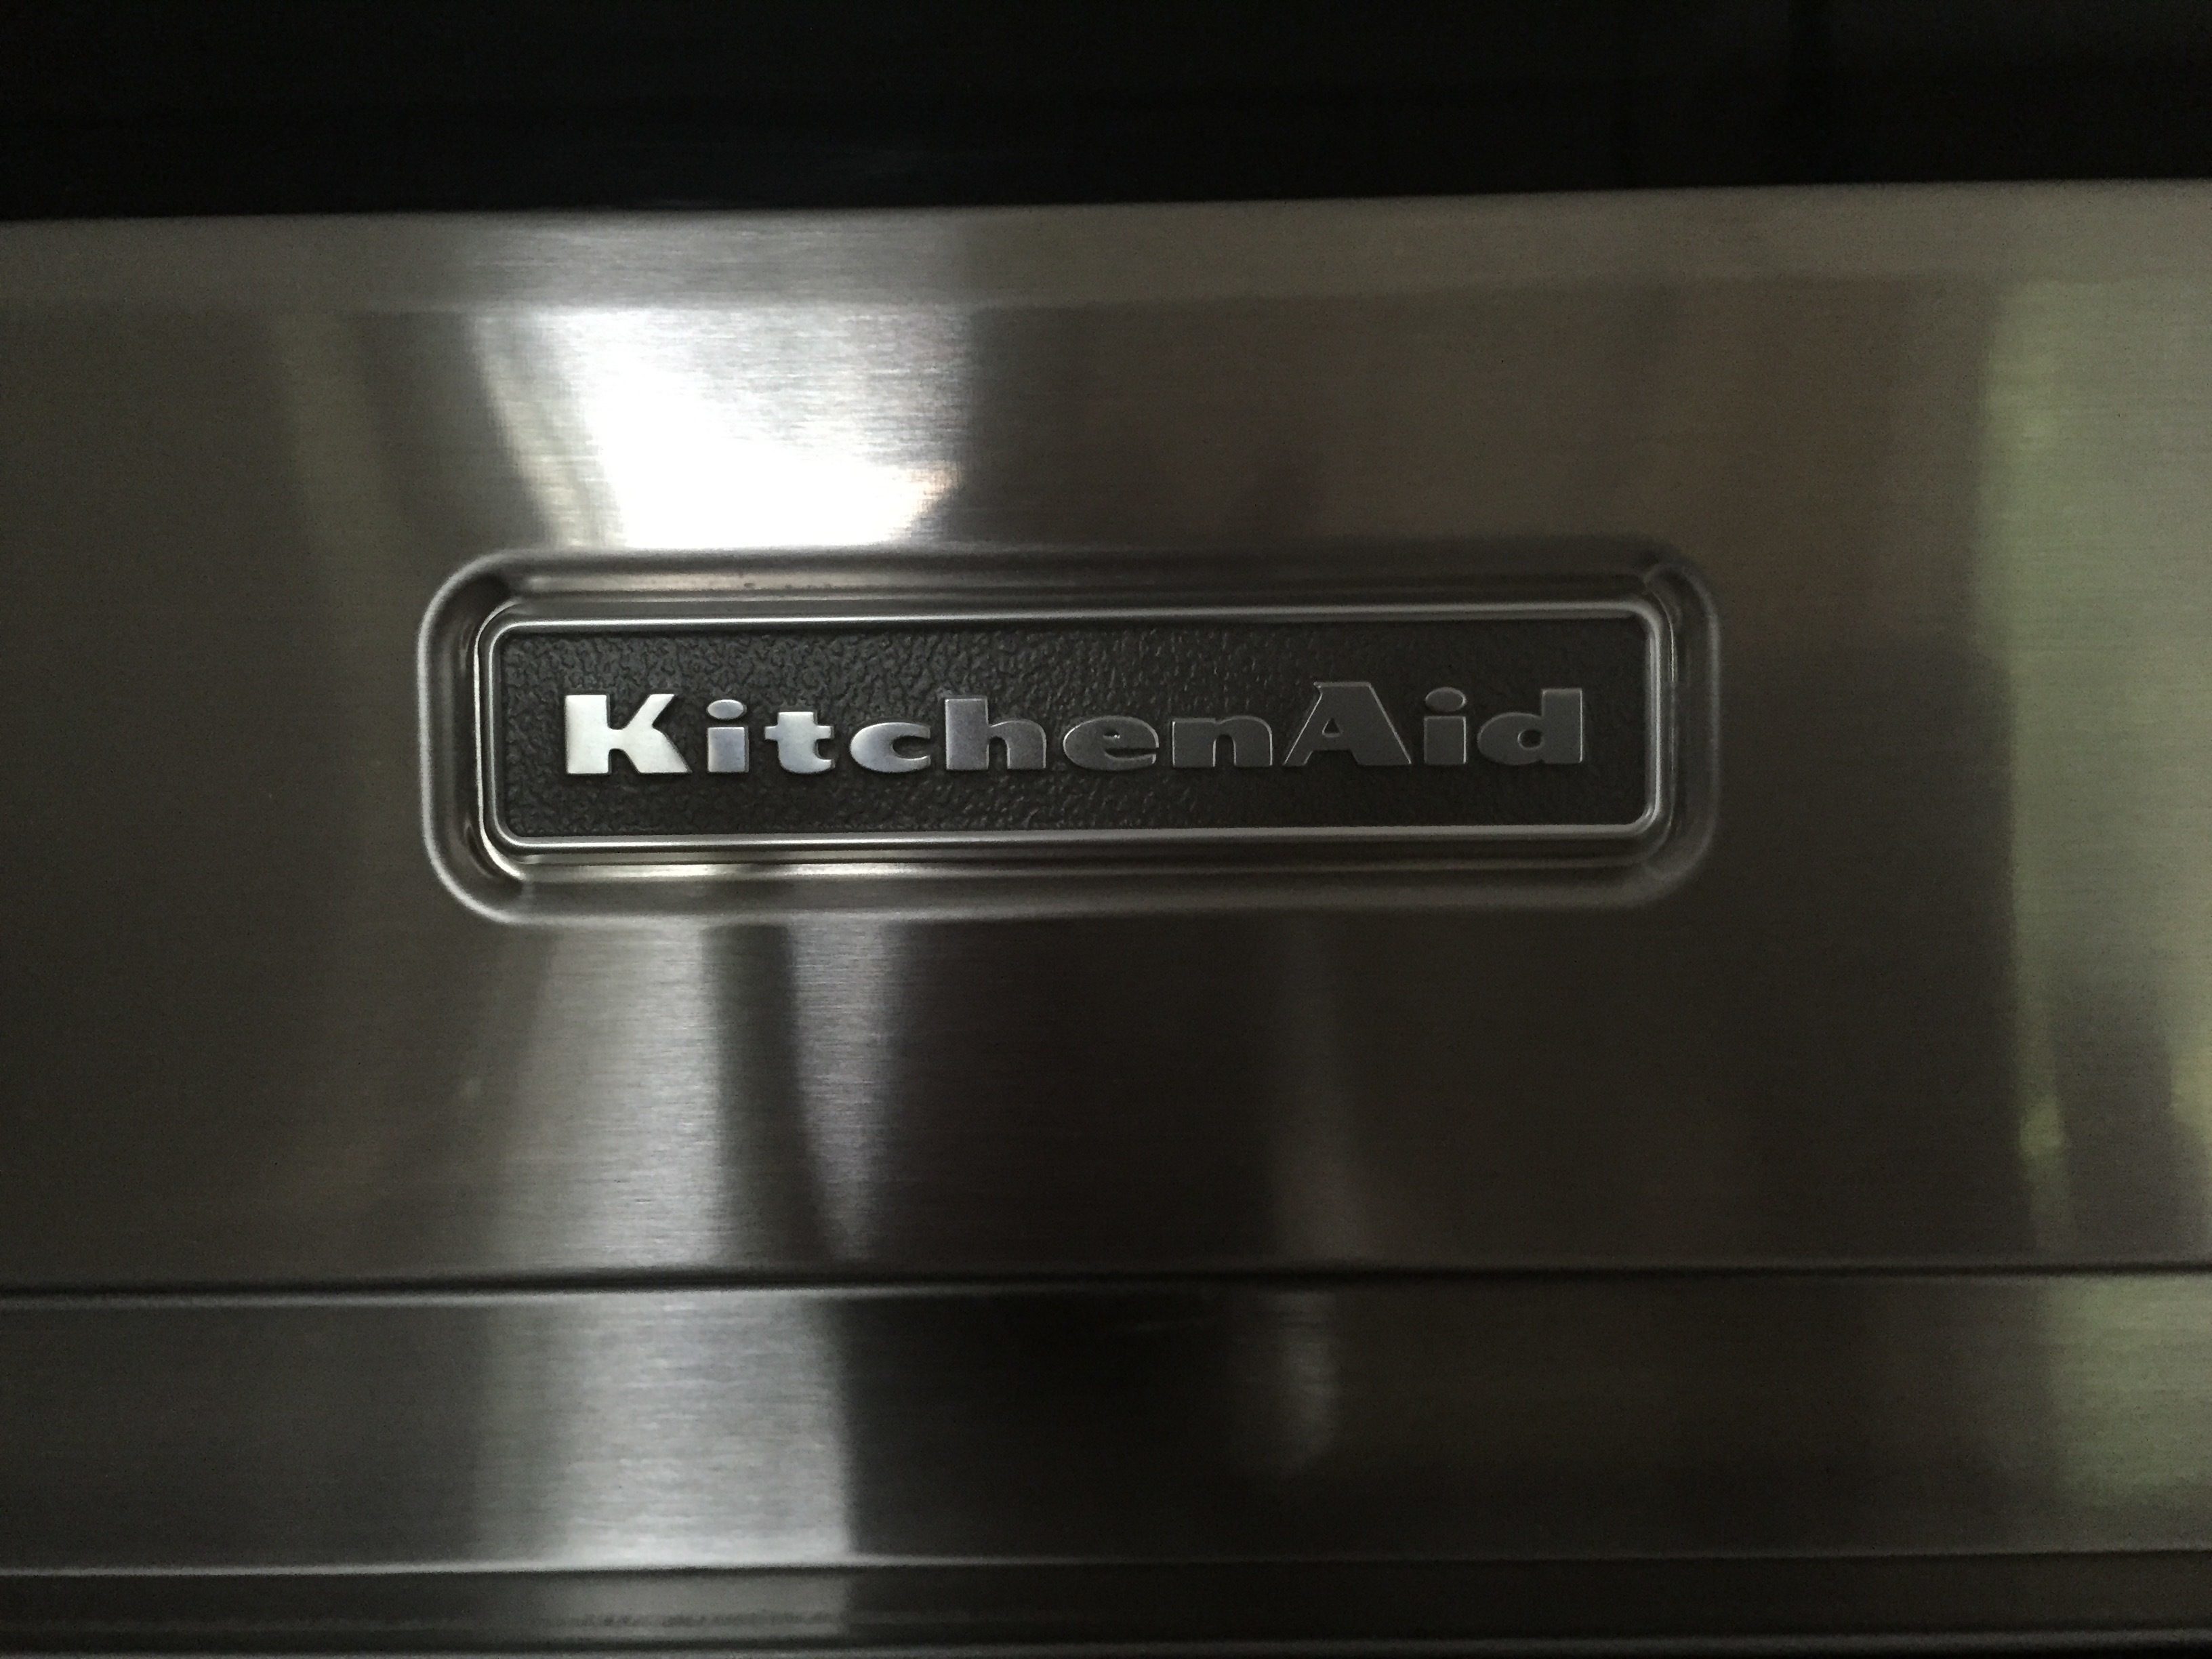 Top 216 Complaints and Reviews about KitchenAid Microwave